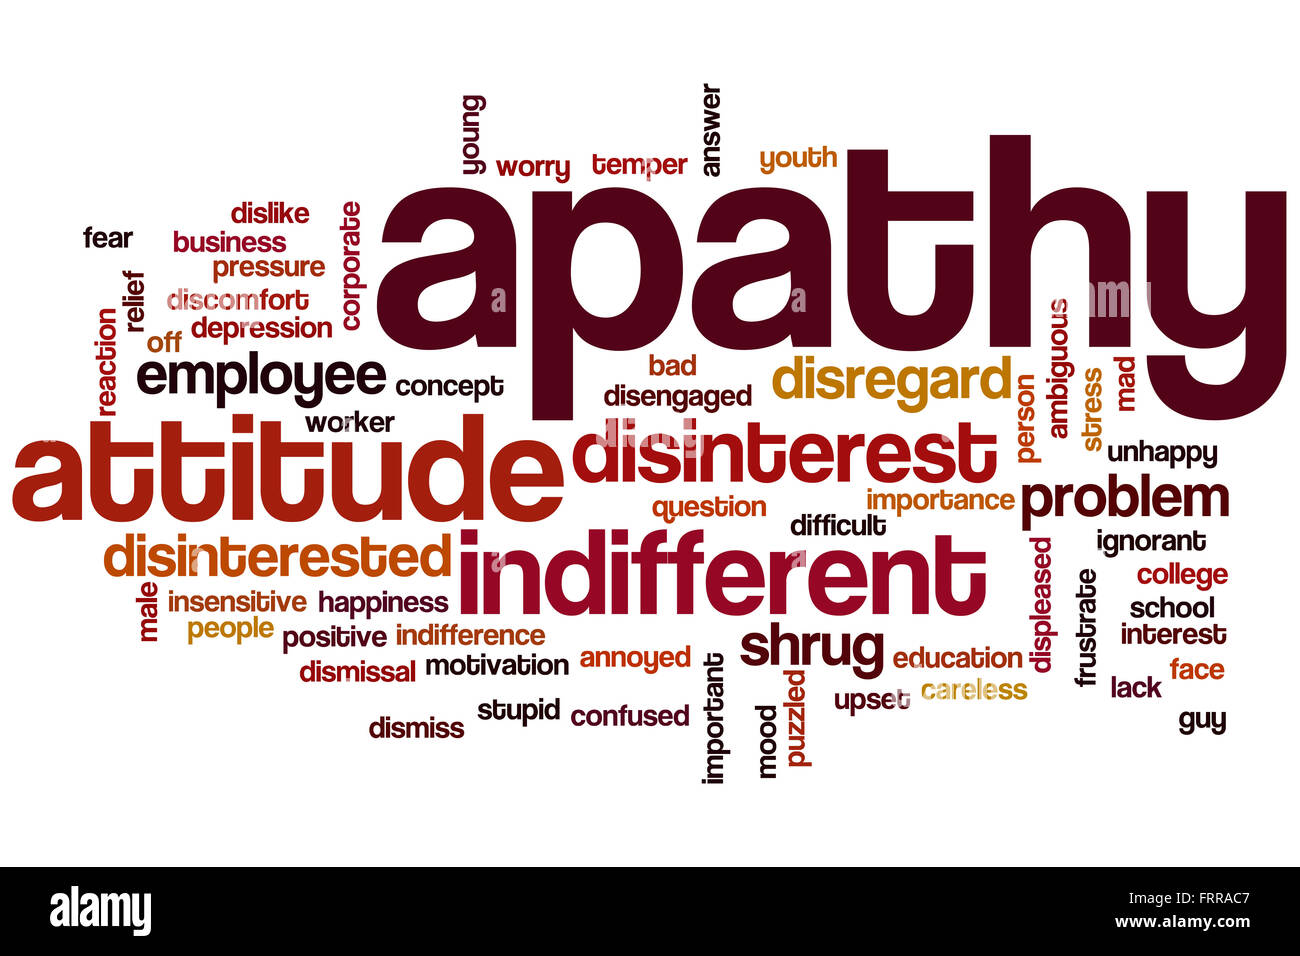 Apathy word cloud concept with indifferent disinterest related tags Stock Photo